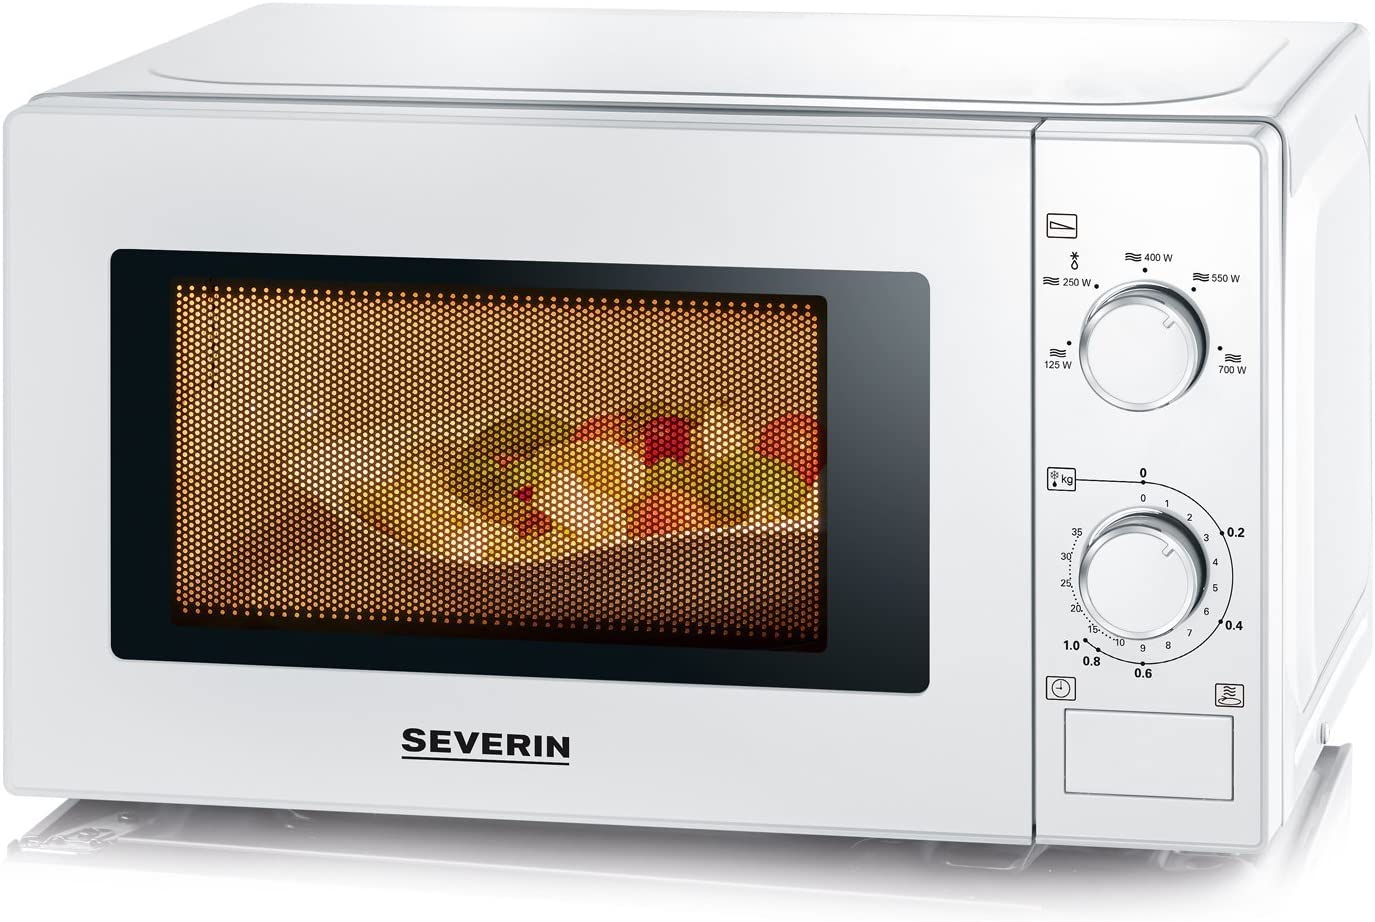 Severin MW 7890 Microwave, 700 Watt, 20 L Cooking Space, Quick and Easy, Ideal for Warming Up